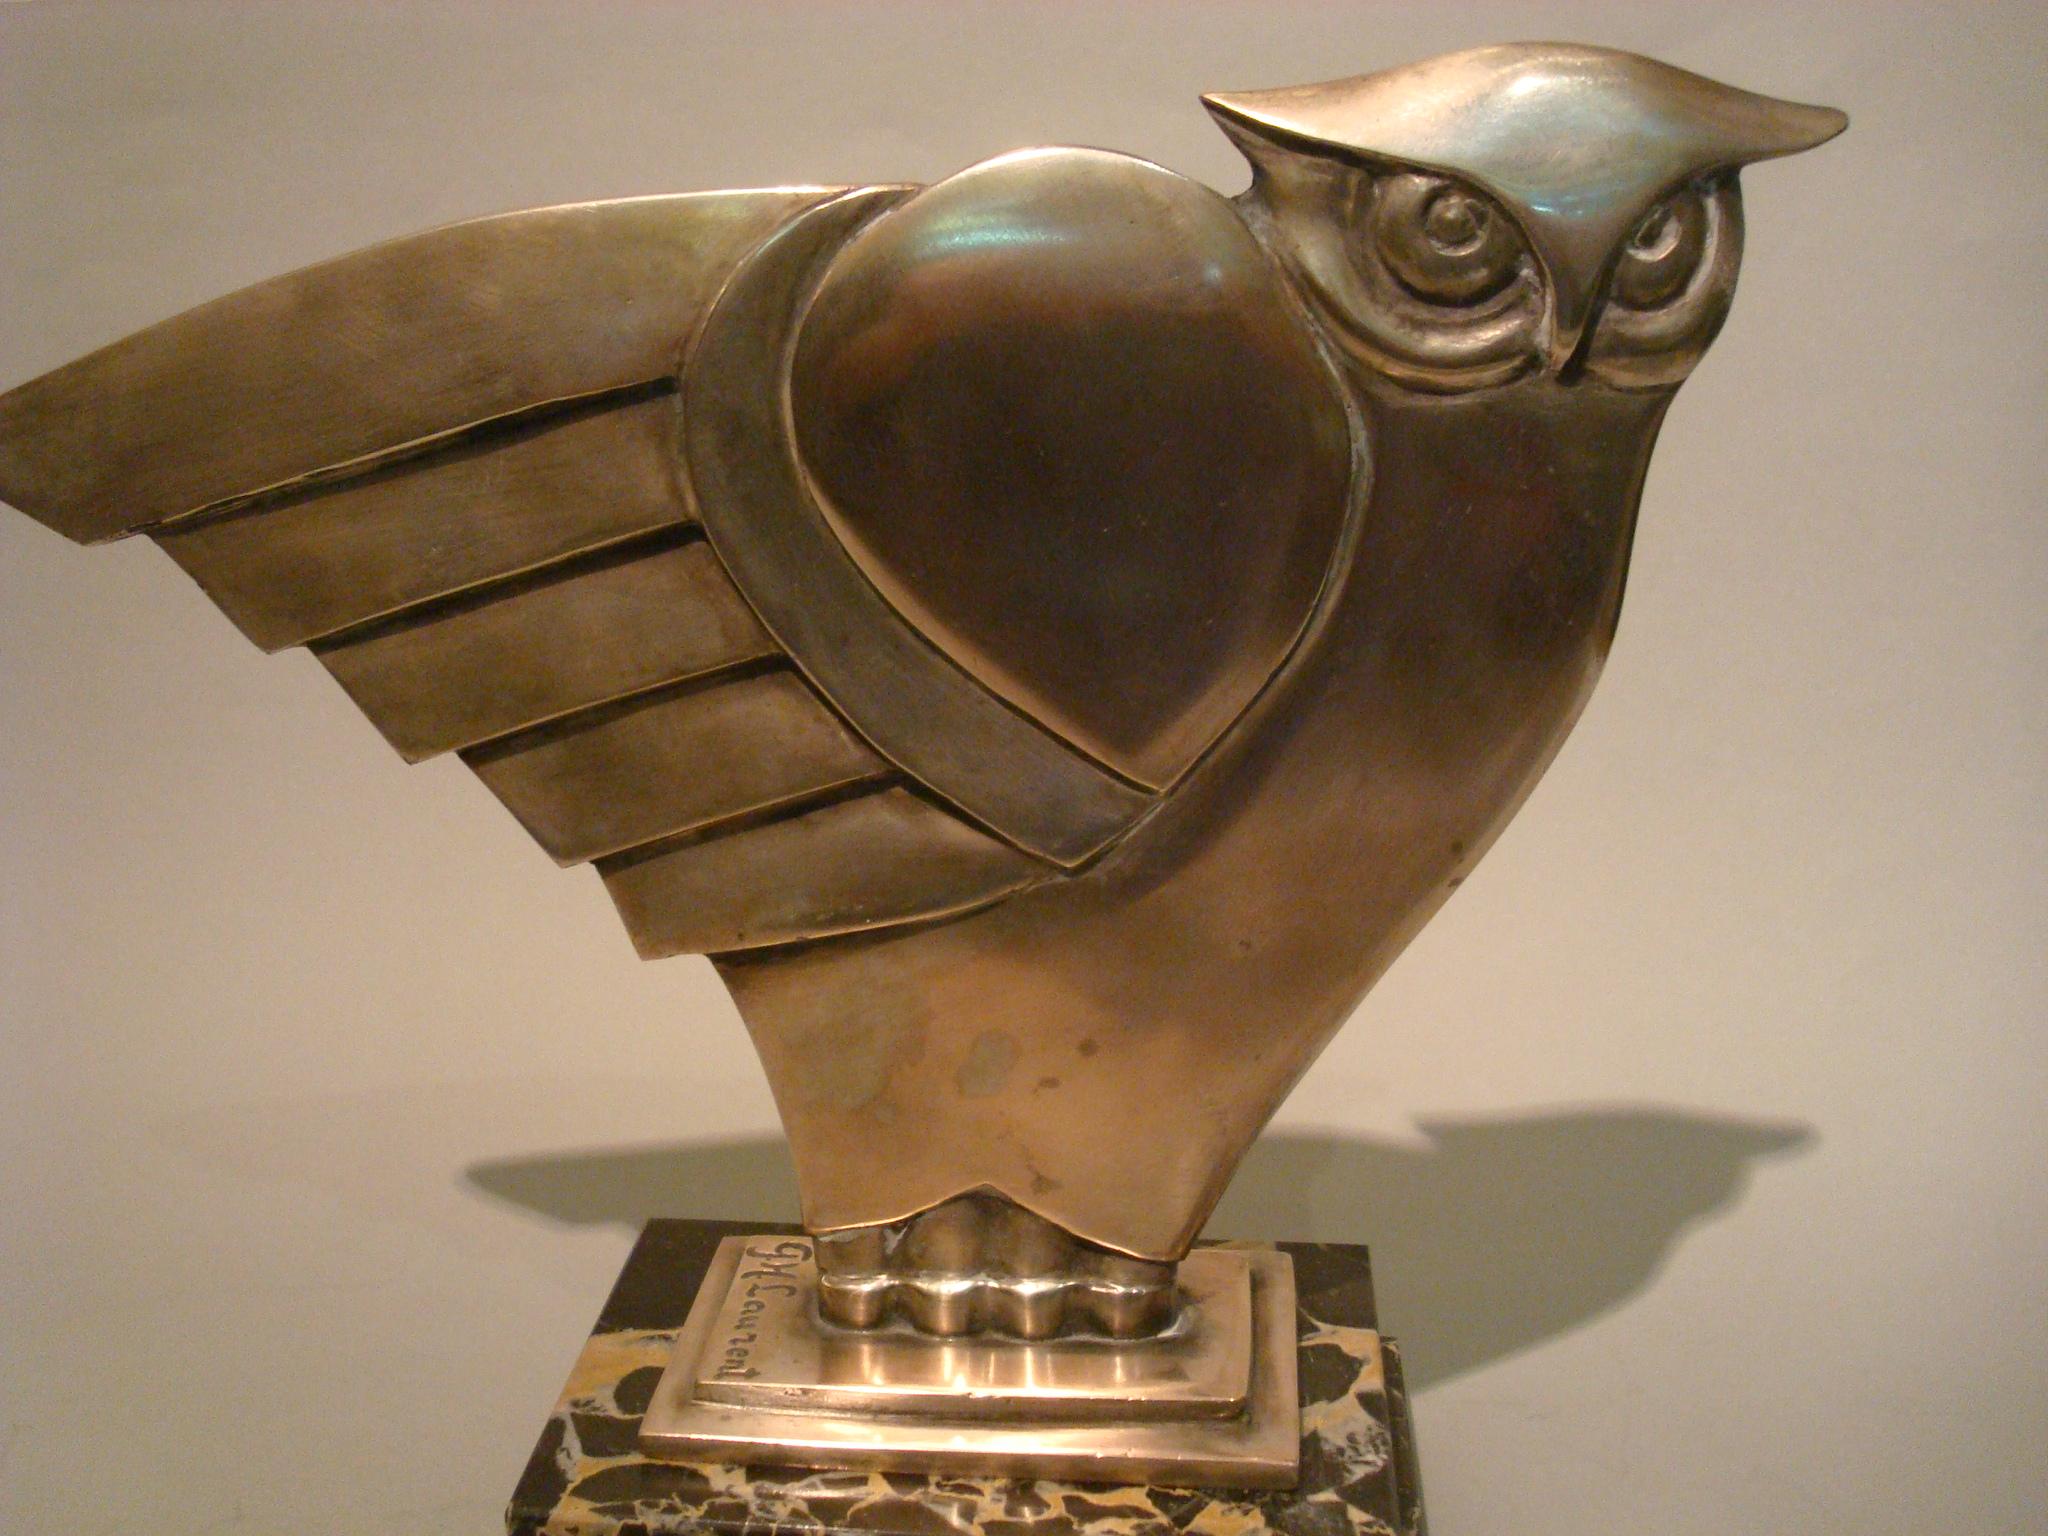 Handcrafted bronze sculpture Decor Home Marble Owl Art Abstract Picasso Deal Art 